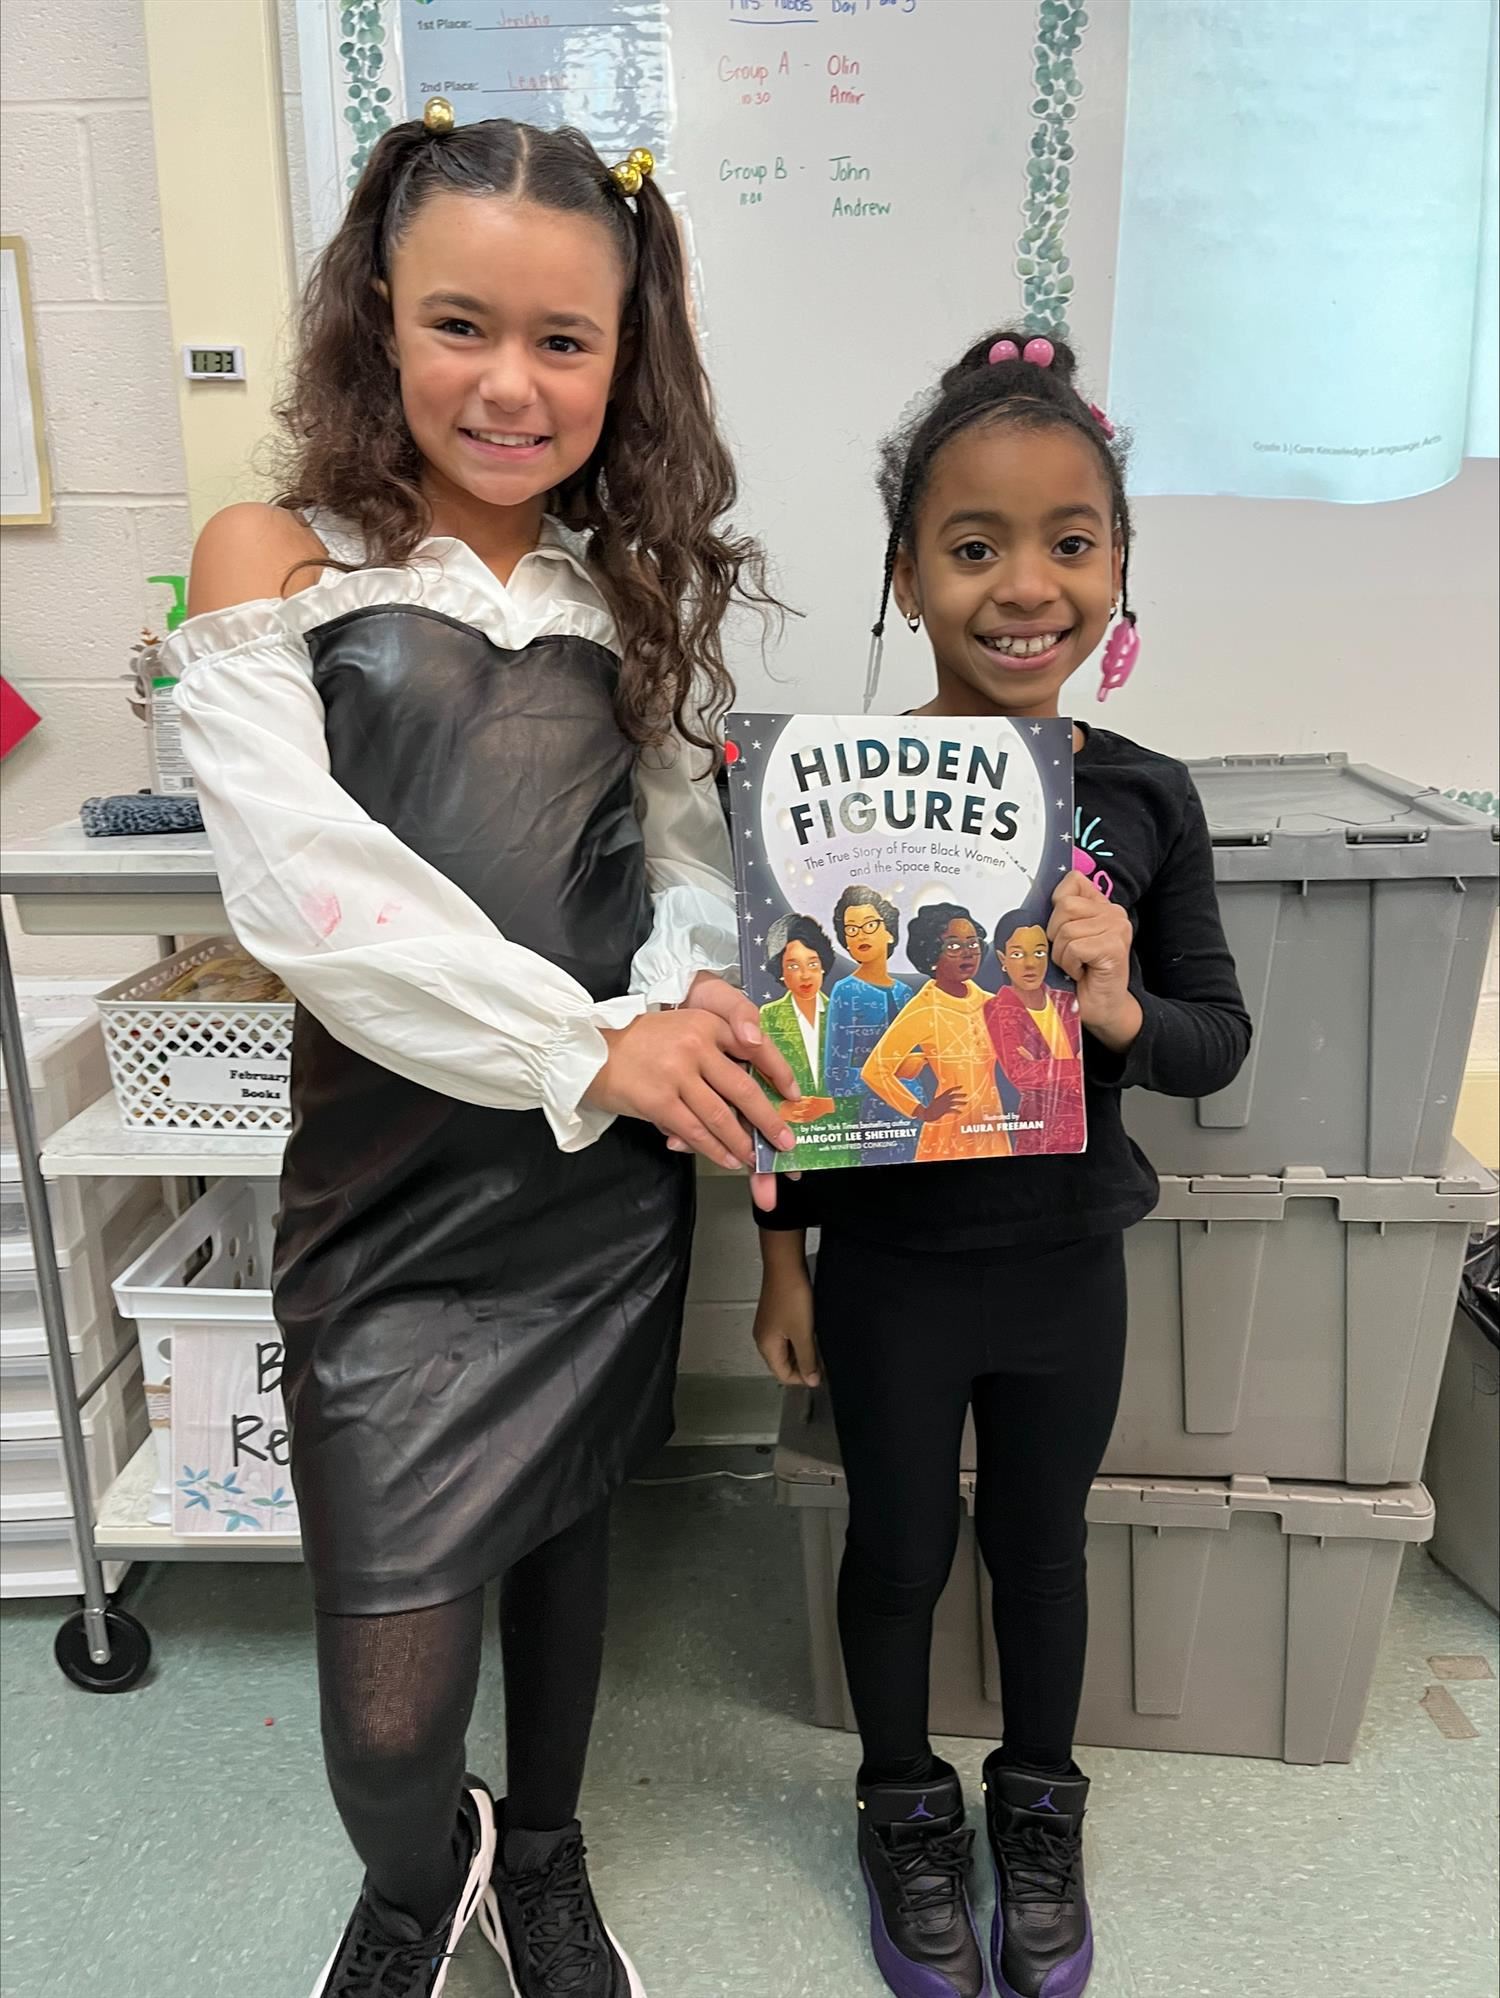 Two third-graders displaying the book "Hidden Figures."